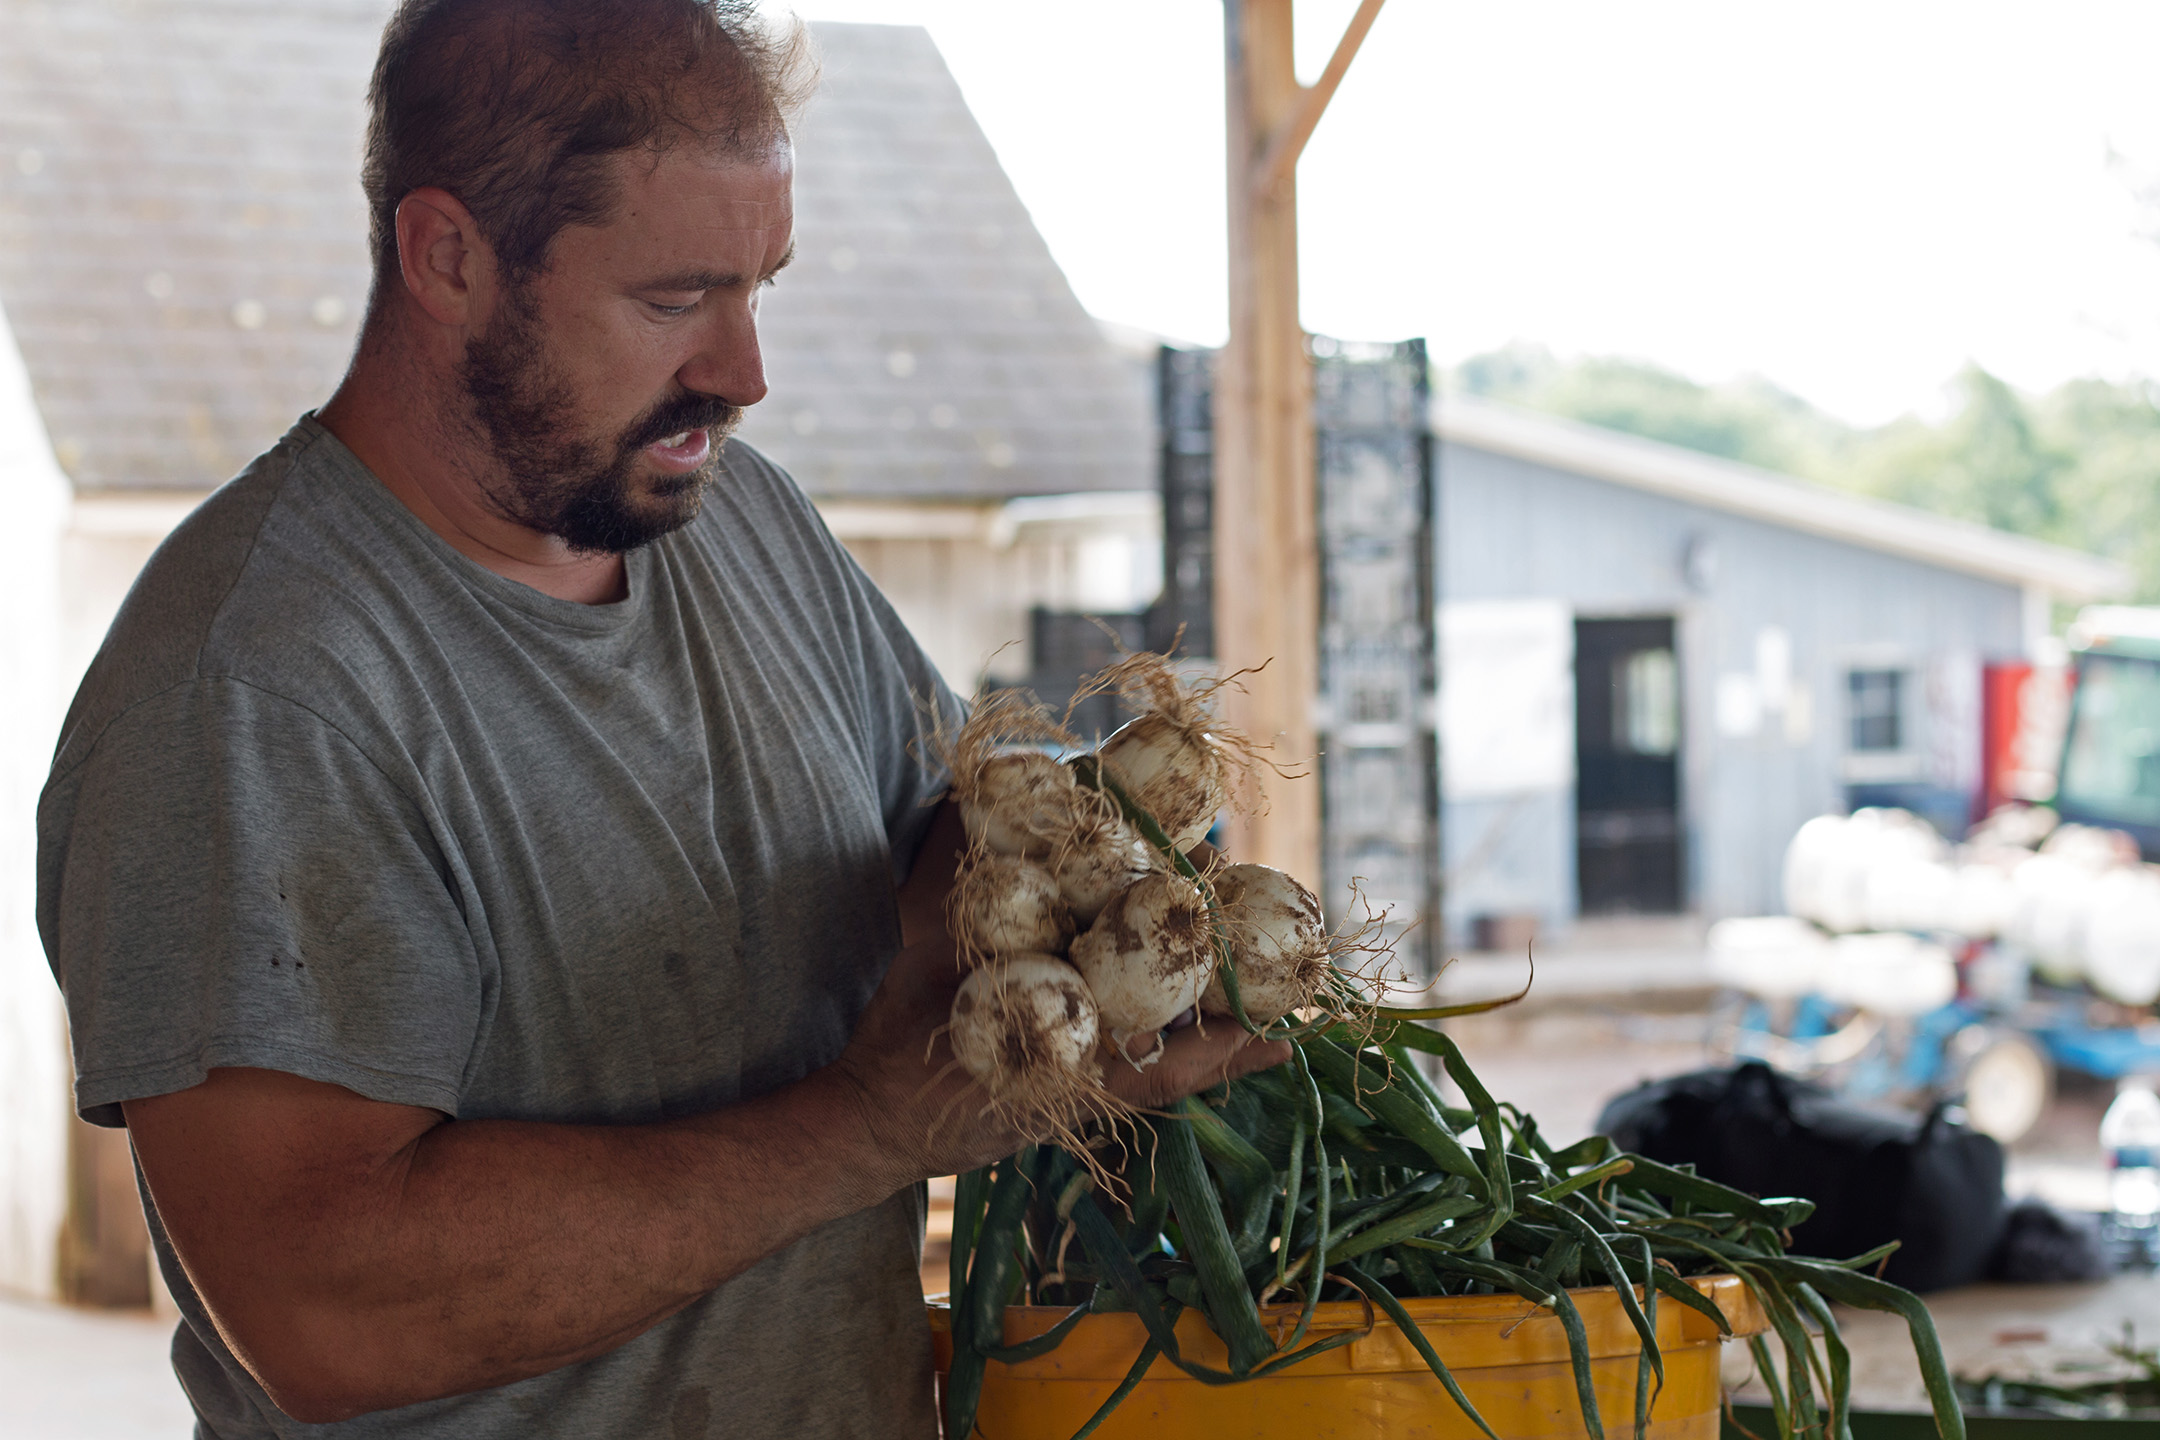 William DellaCamera shows off a bunch of freshly harvested onions on July 13th, 2018.